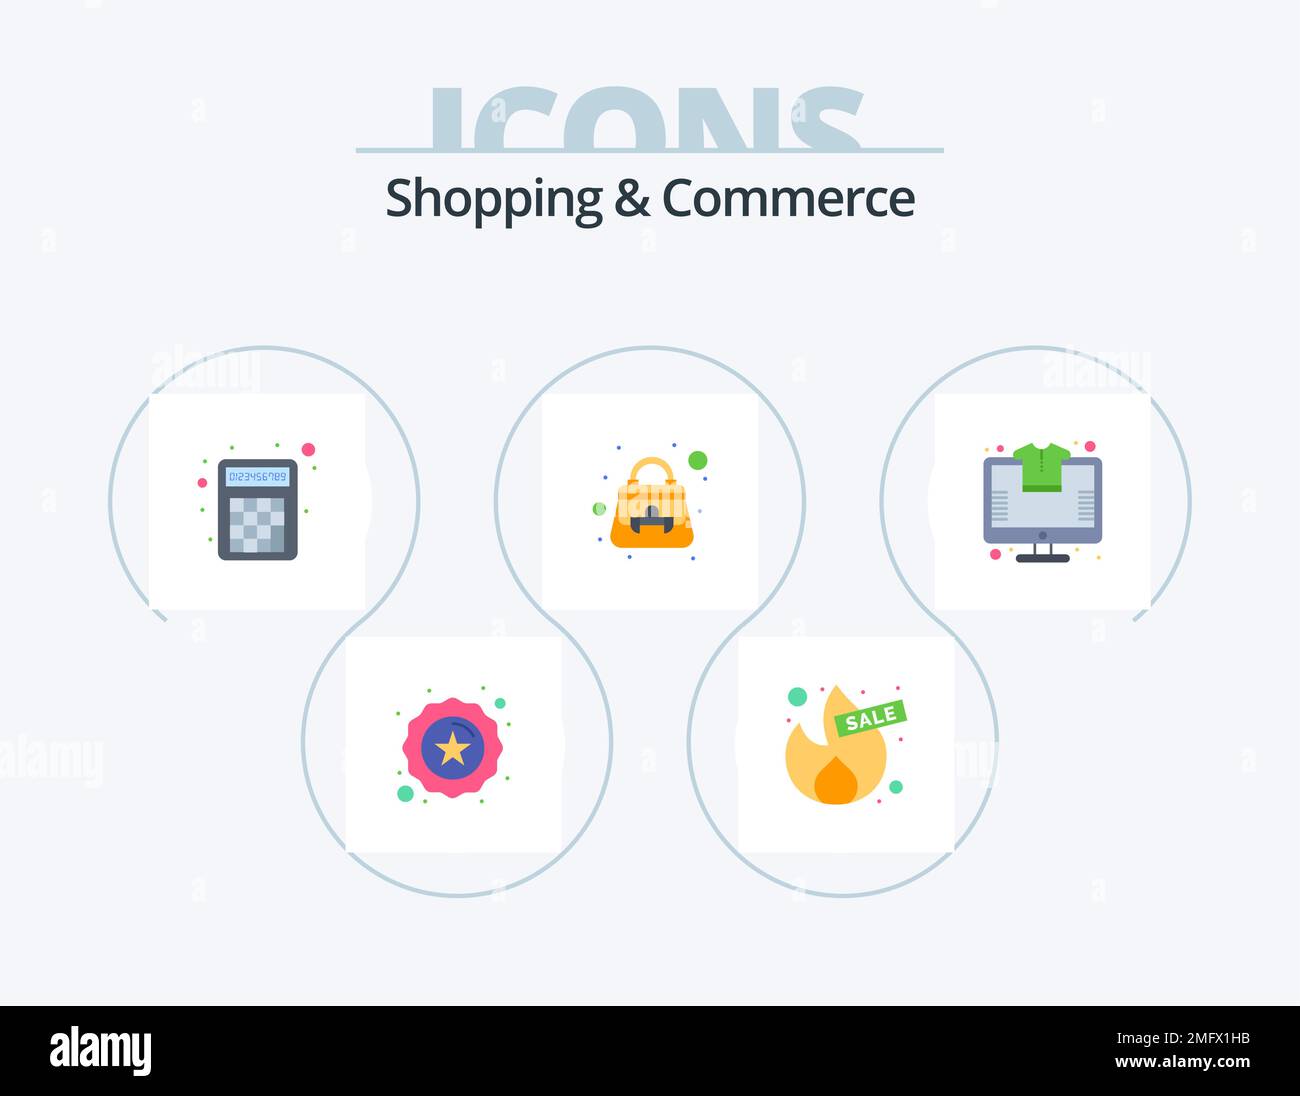 Shopping And Commerce Flat Icon Pack 5 Icon Design. store. online. calculator. shoulder bag. ladies purse Stock Vector